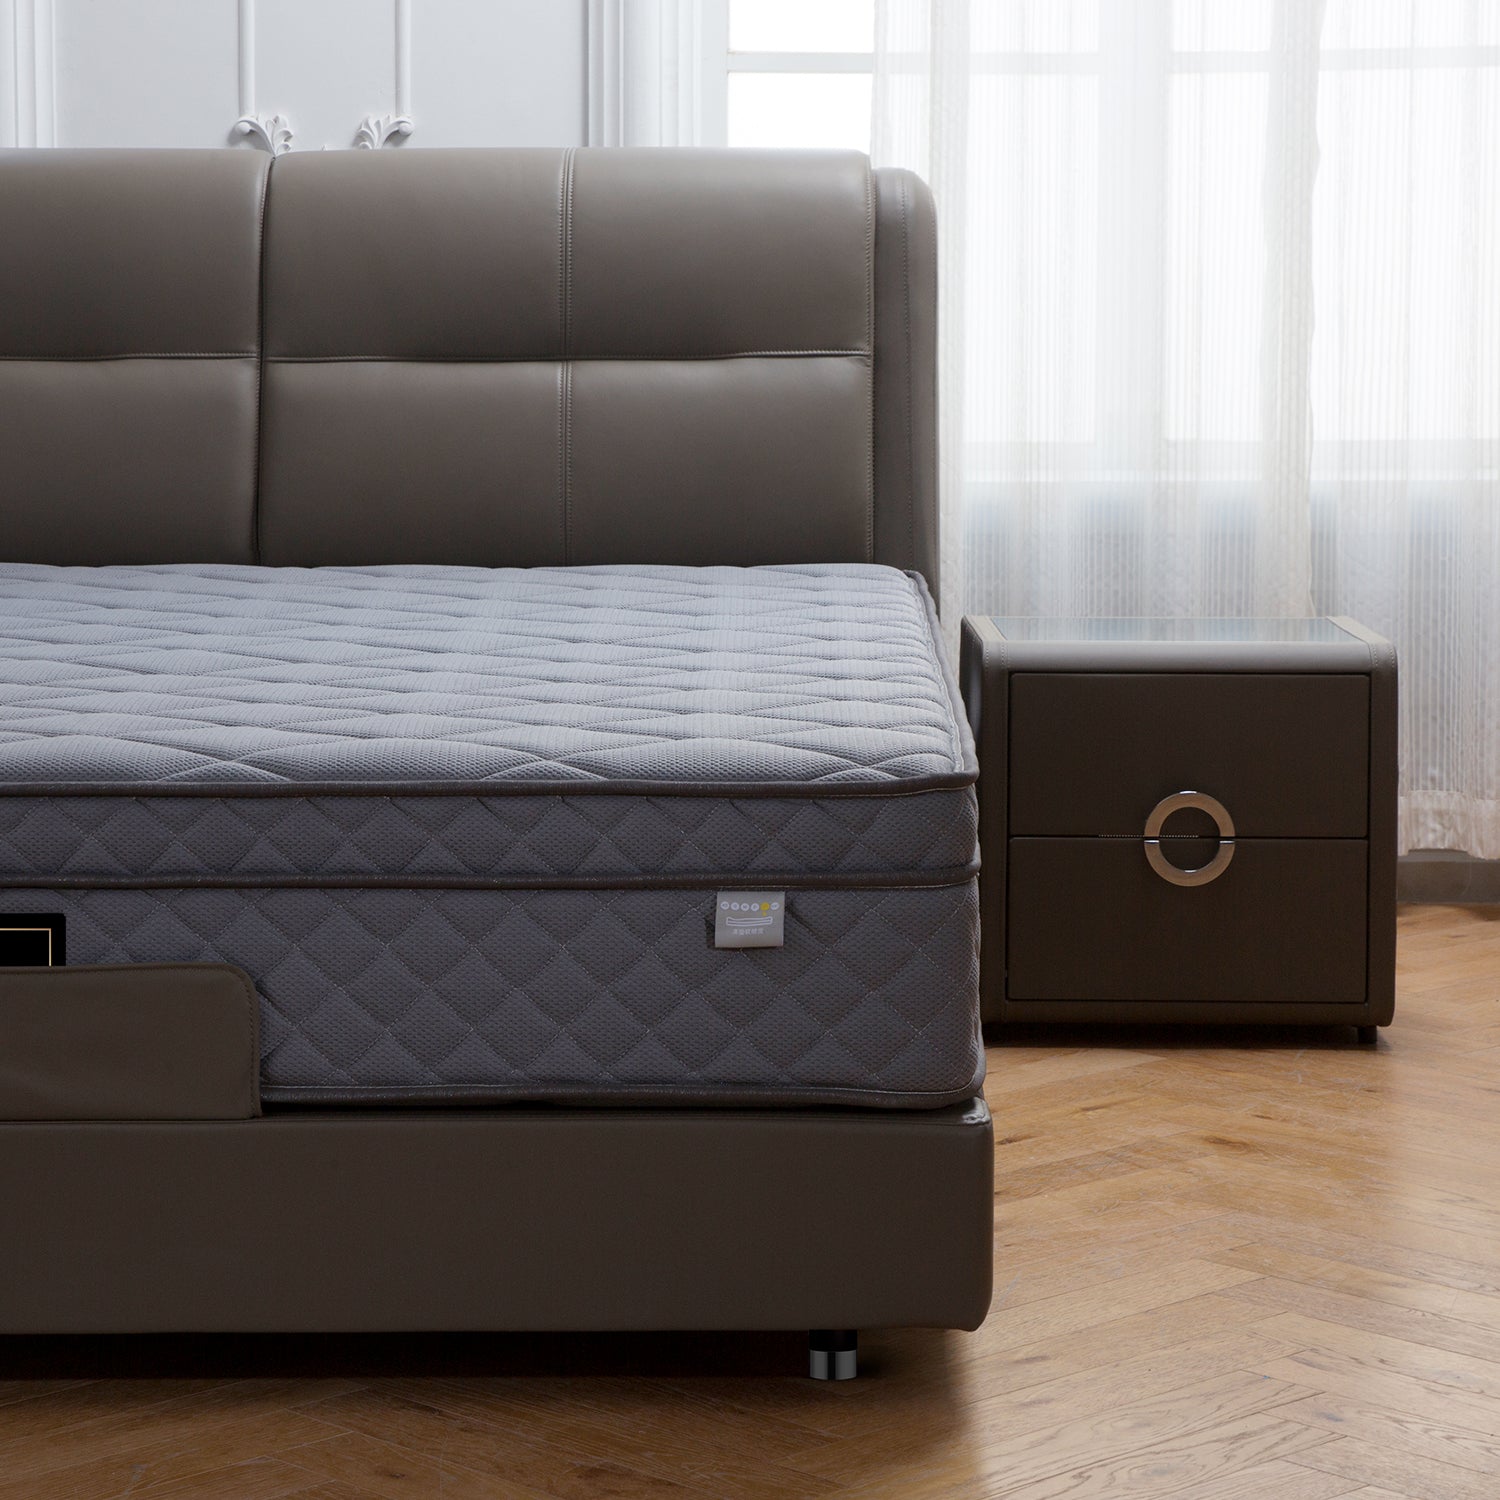 Minimalist bed frame with a padded leather headboard and grey quilted mattress, featuring a matching nightstand with circular handles, wooden floor, and sheer curtains.